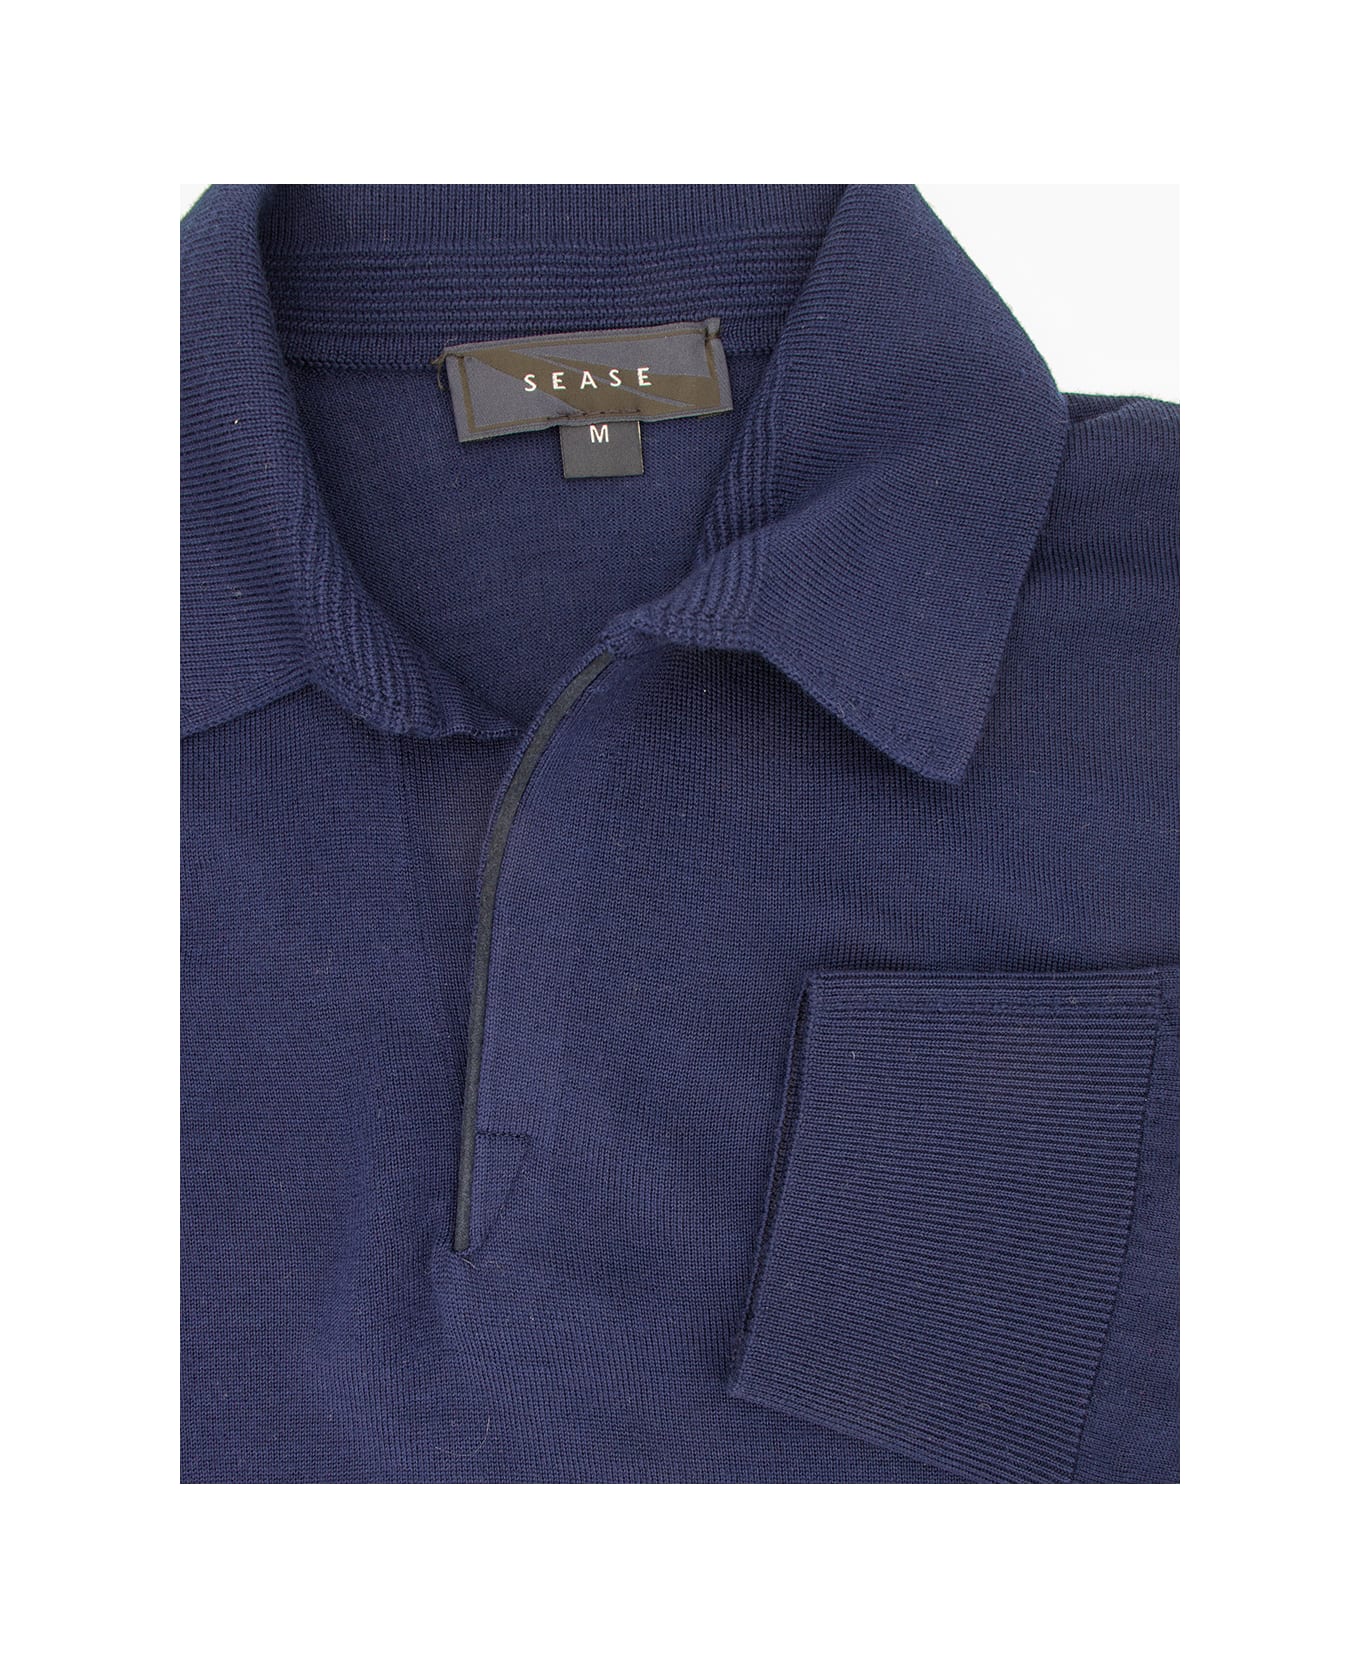 Sease Polo - NAVY BLUE ポロシャツ